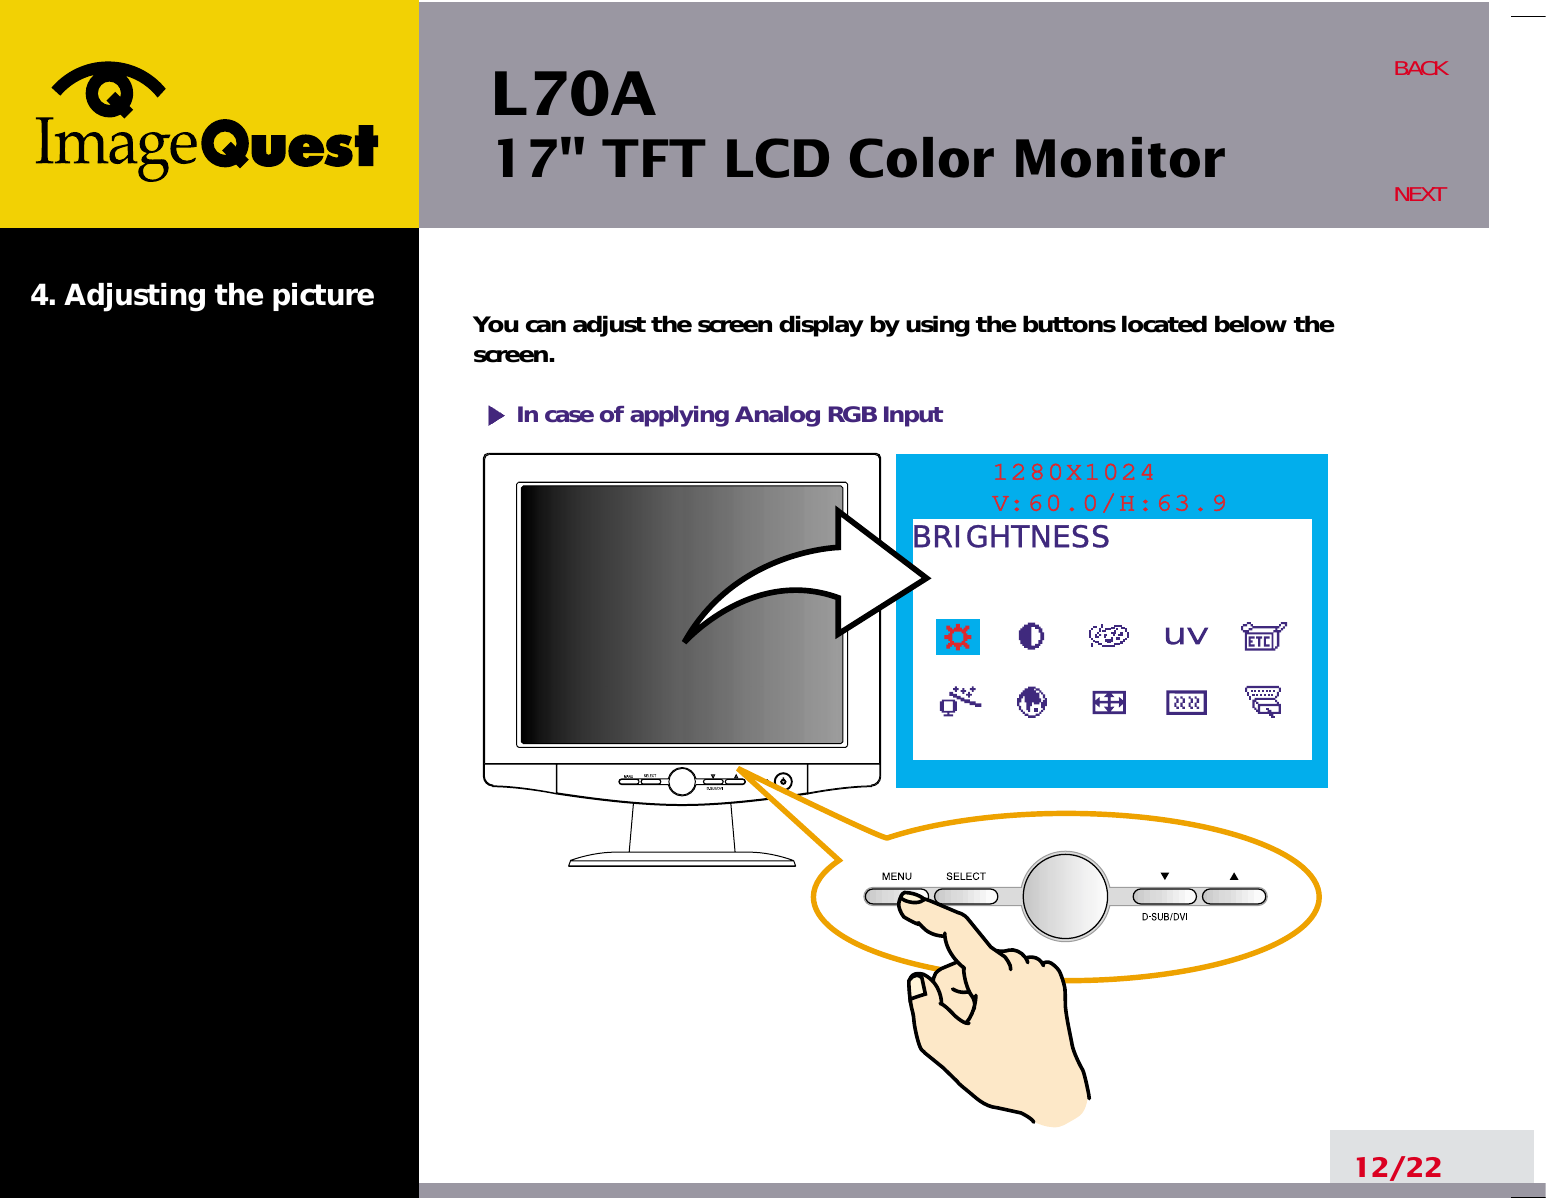 L70A17&quot; TFT LCD Color Monitor4. Adjusting the picture12/22BACKNEXTYou can adjust the screen display by using the buttons located below thescreen.1280X1024V:60.0/H:63.9BRIGHTNESSIn case of applying Analog RGBInput